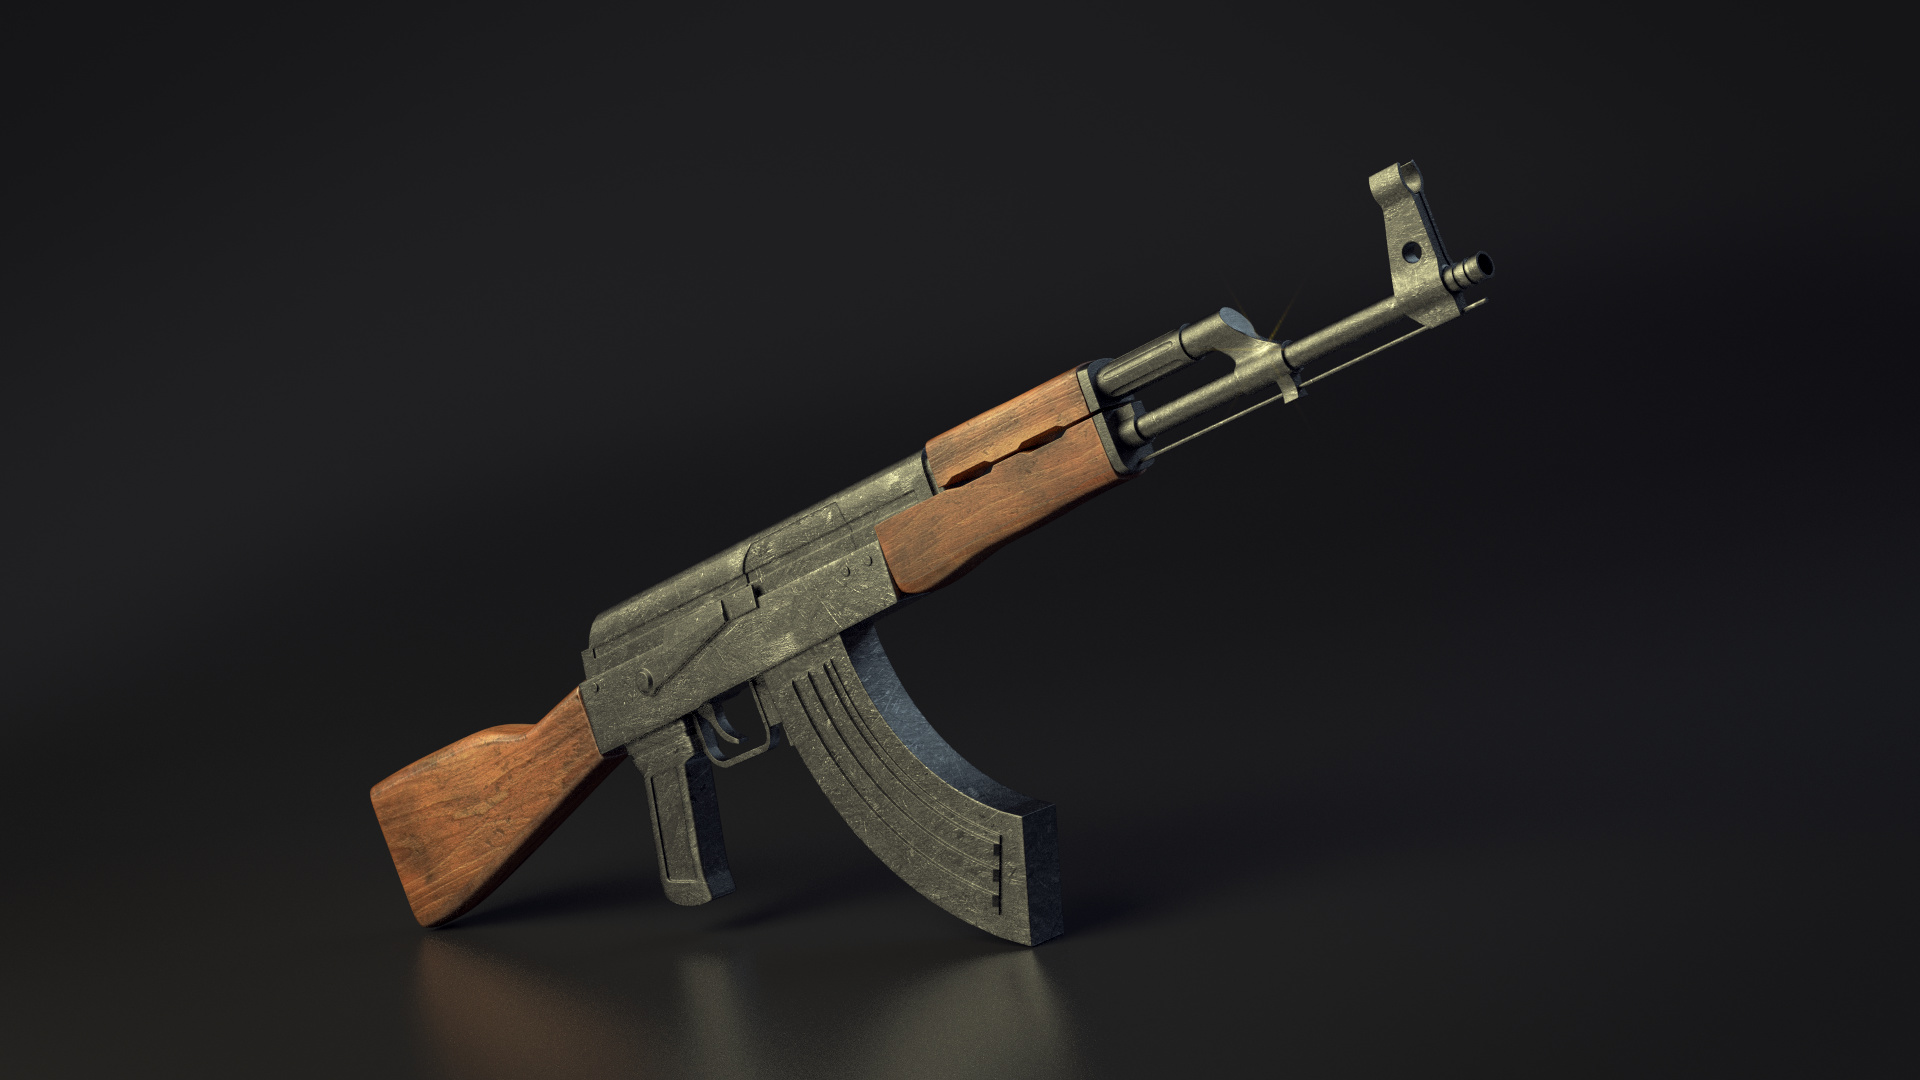 donor do an experiment Prelude Ak-47 - Focused Critiques - Blender Artists Community